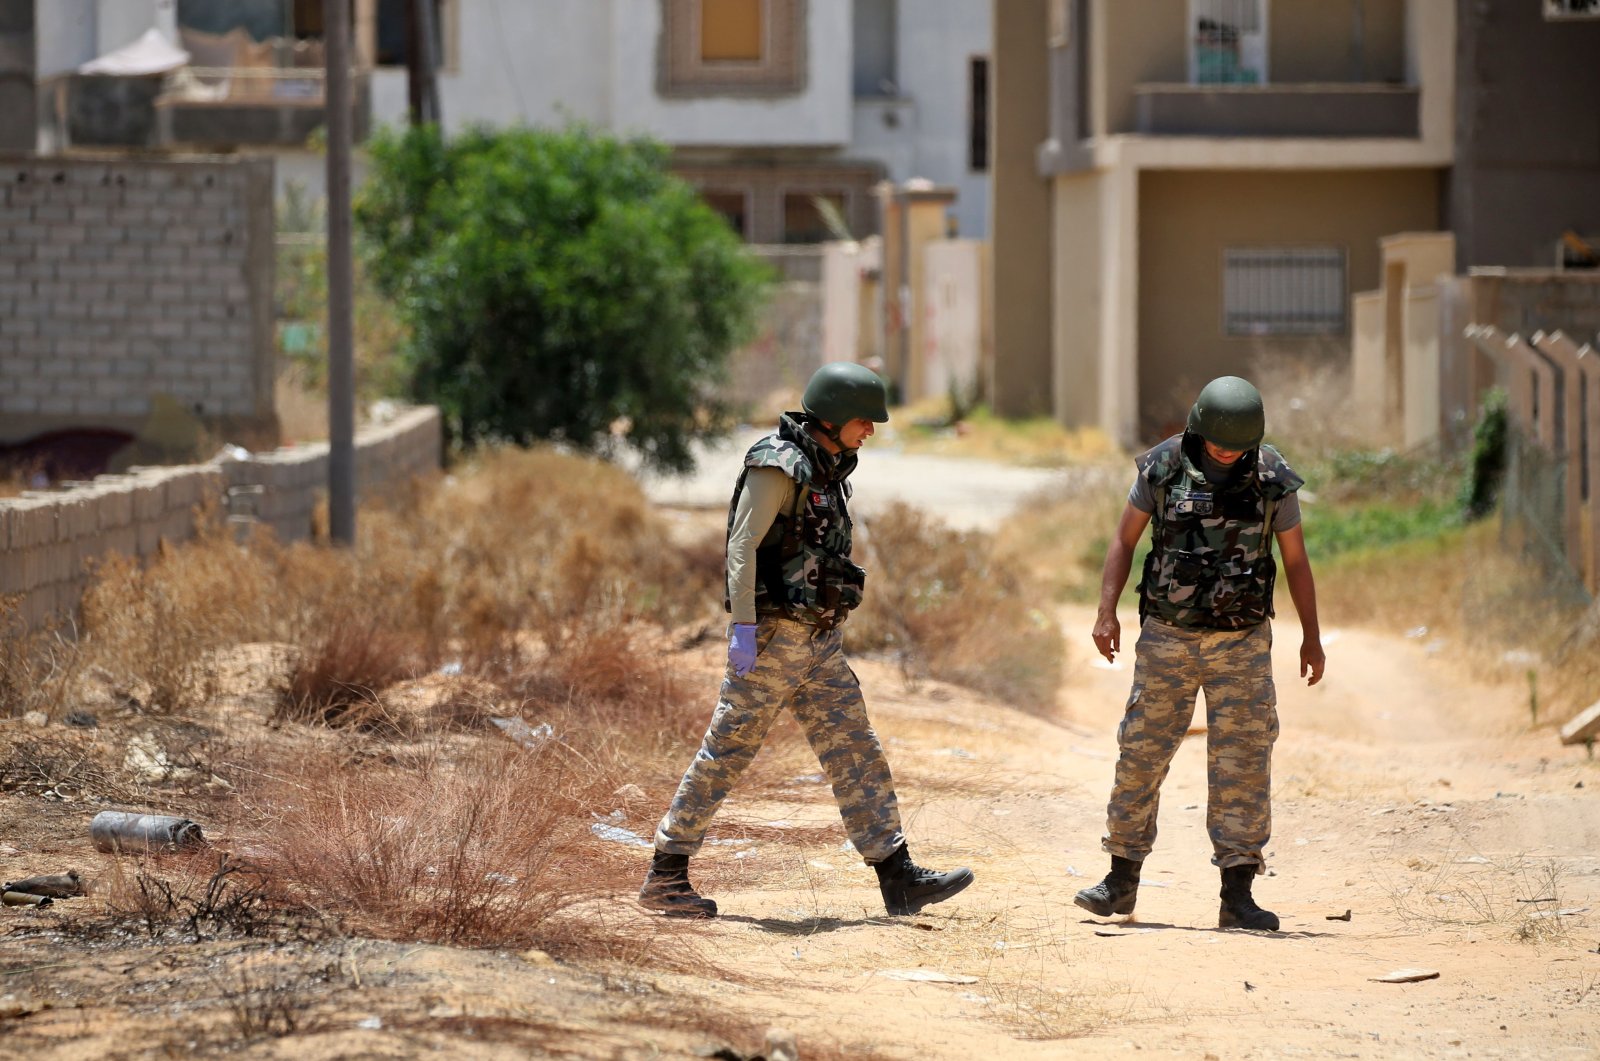 Turkish deminers search and clear landmines in the Salah al-Din area, south of the Libyan capital Tripoli, June 15, 2020. (AFP Photo)